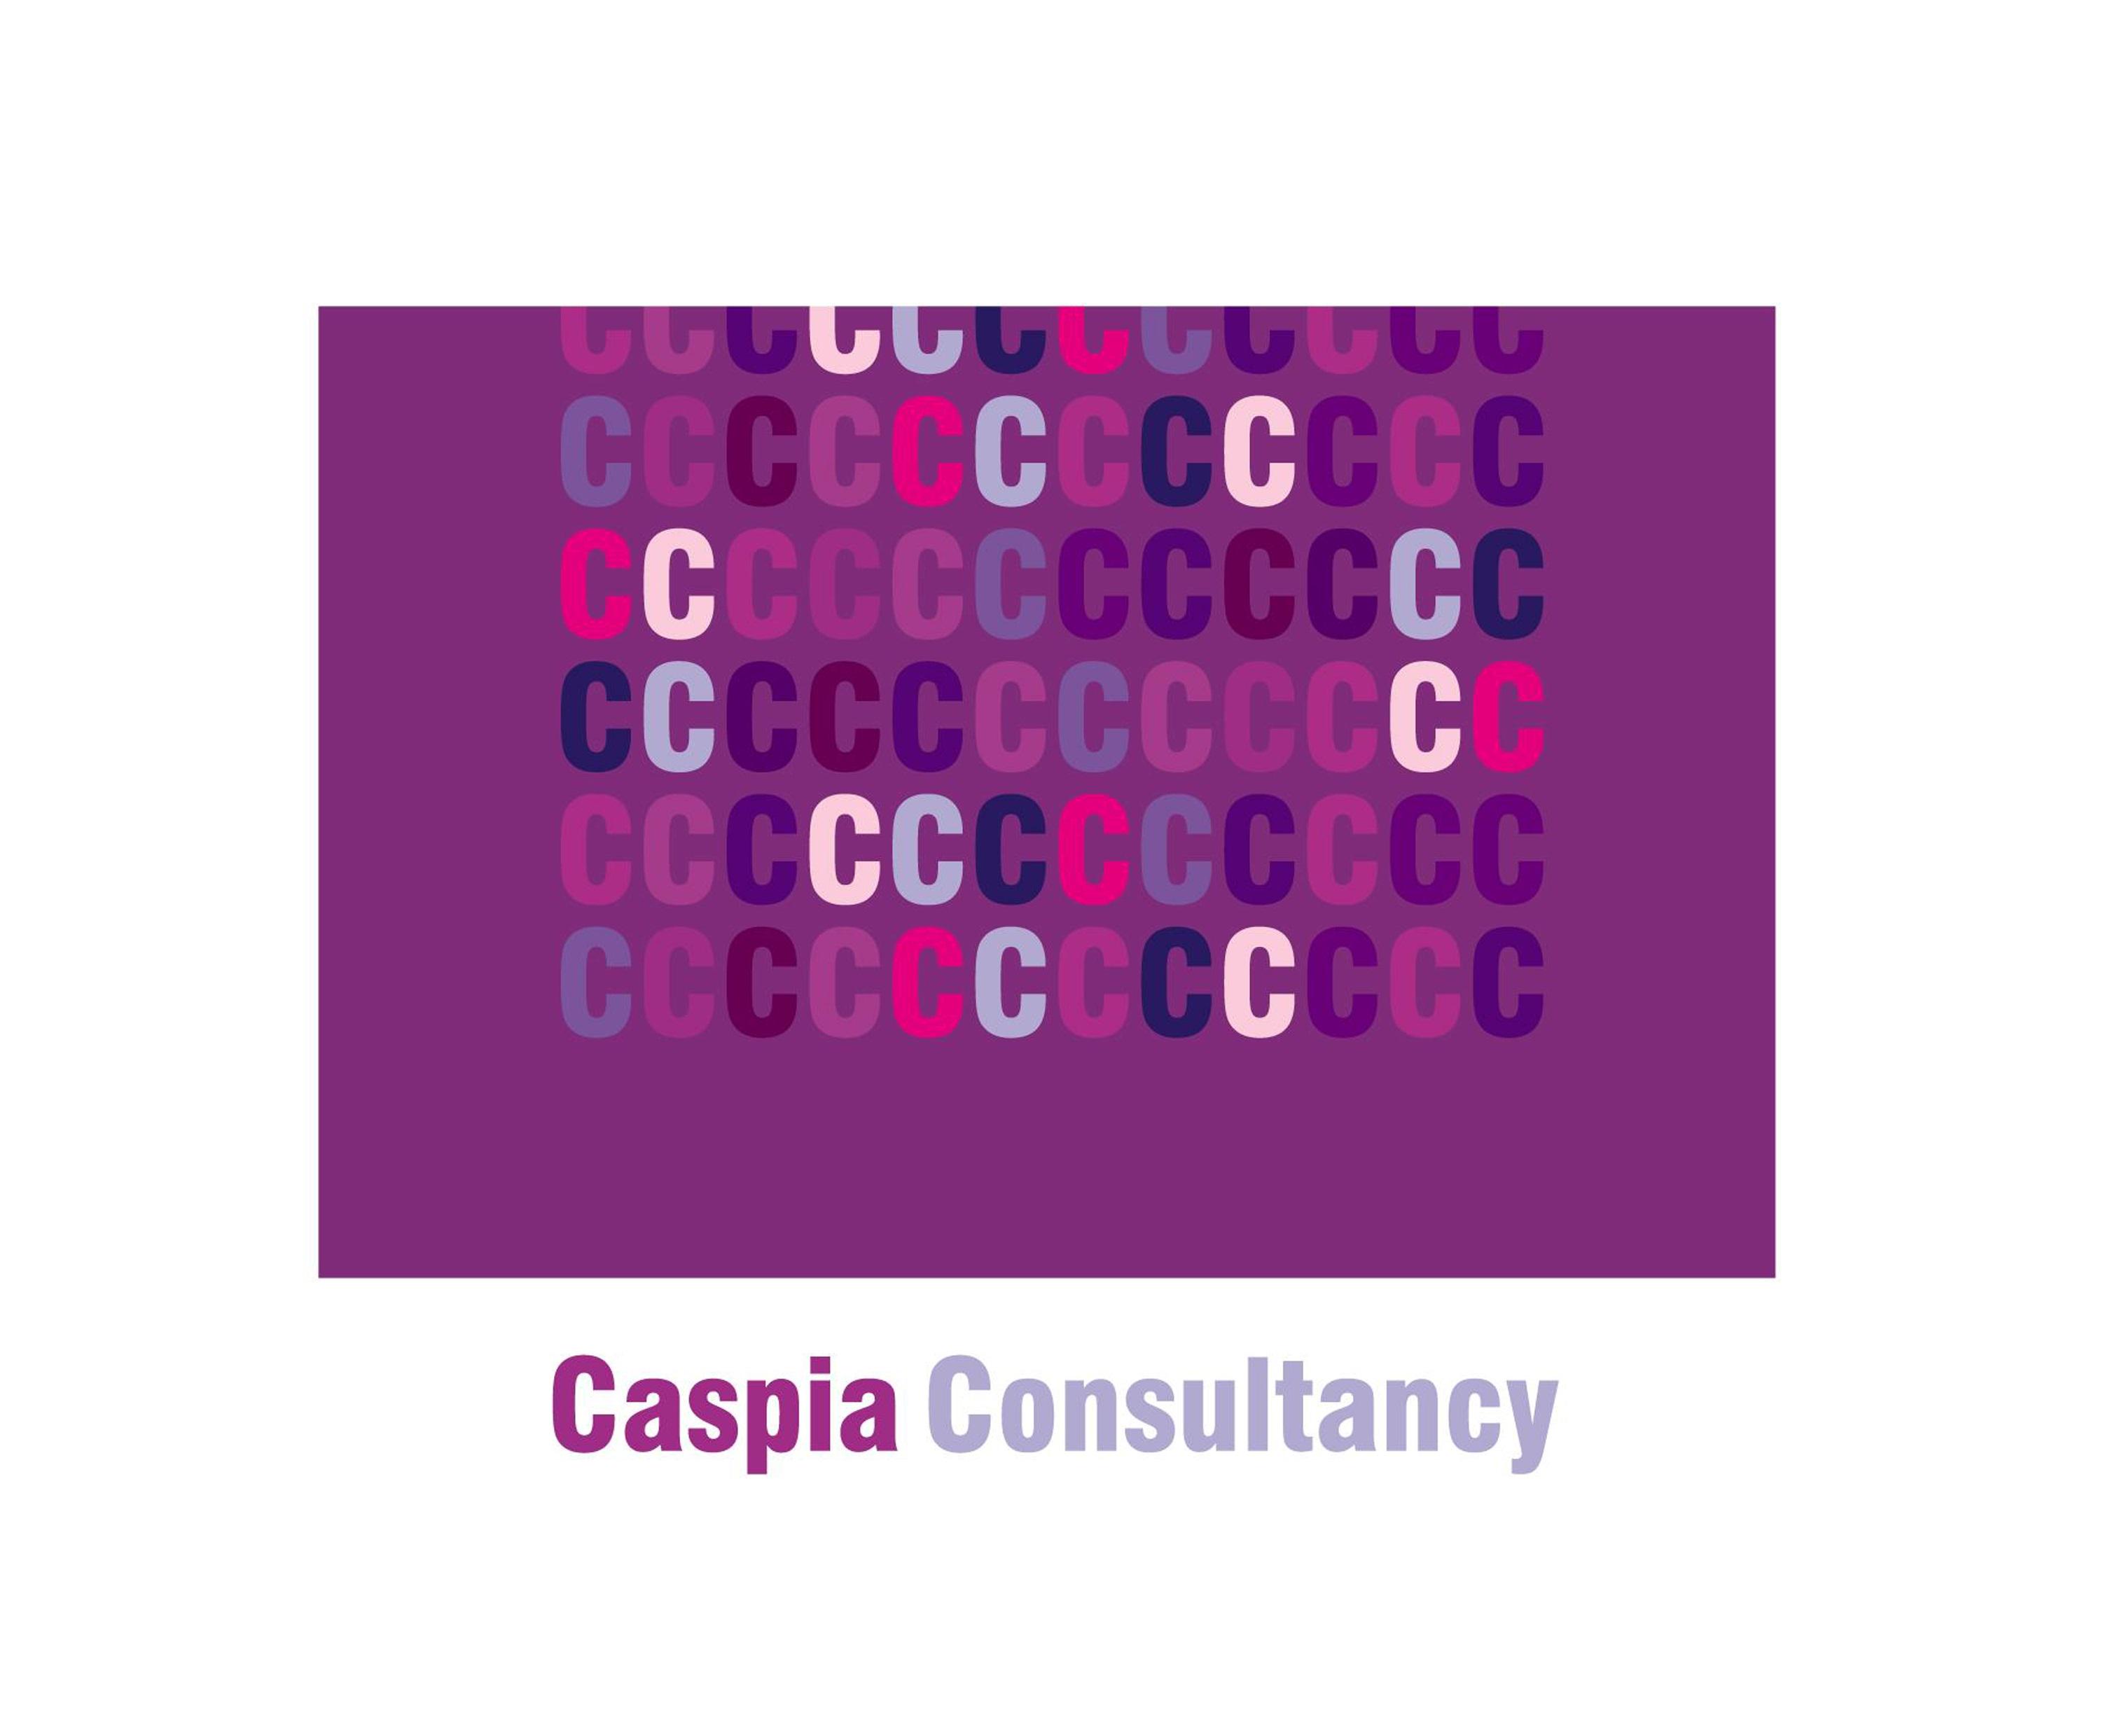 Caspia Consultancy Ltd profile on Qualified.One